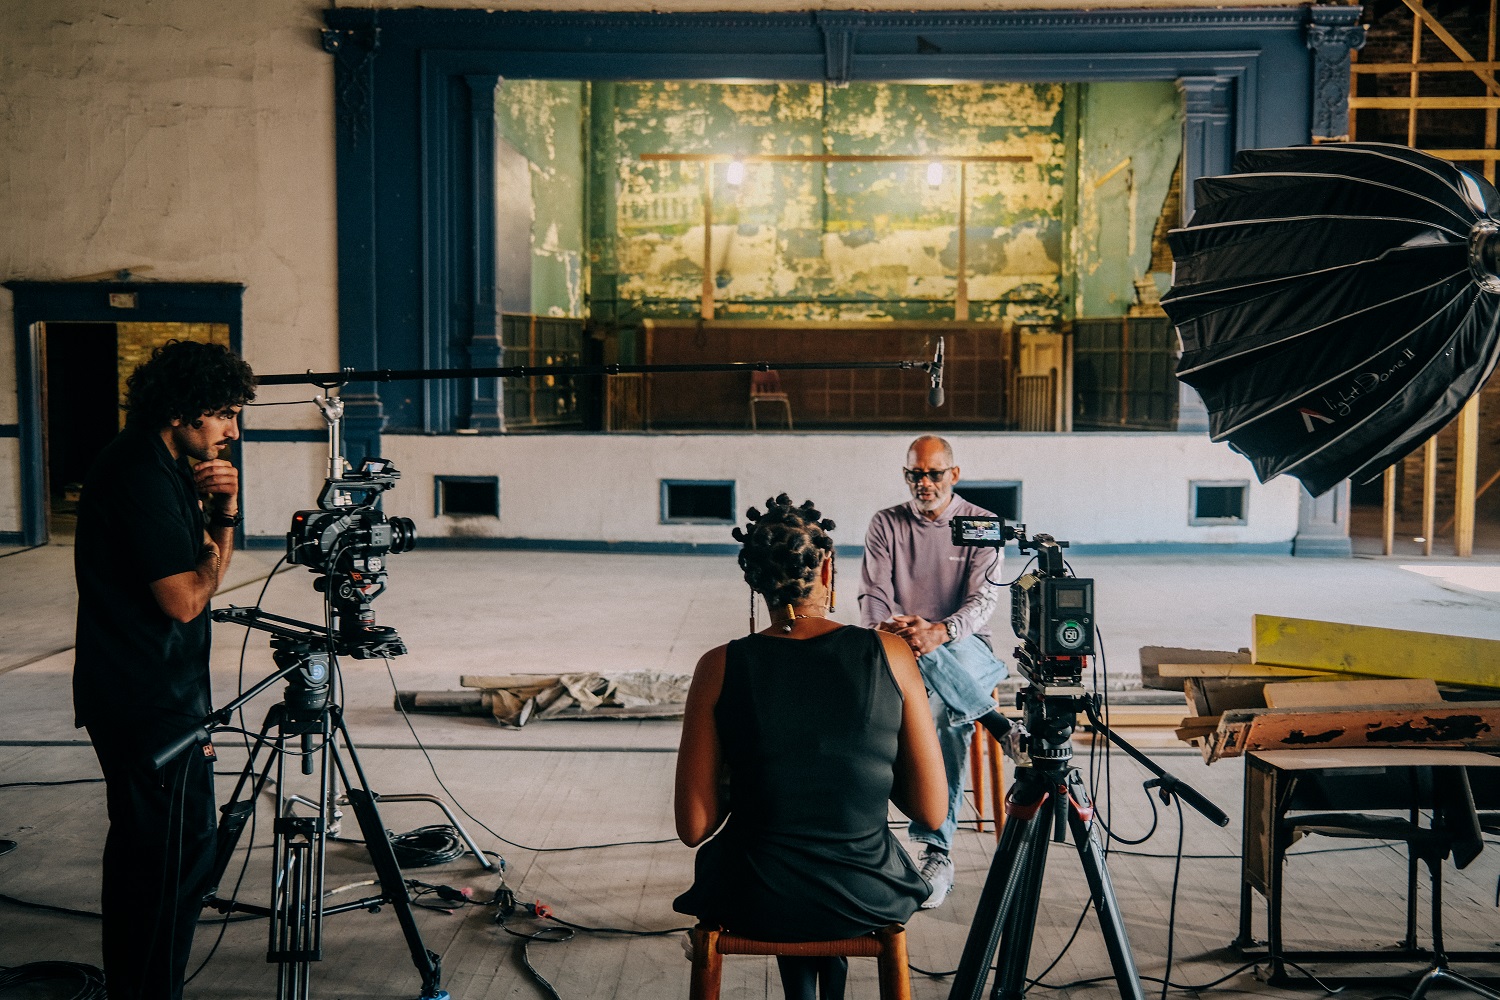 Image of an interview at a film studio